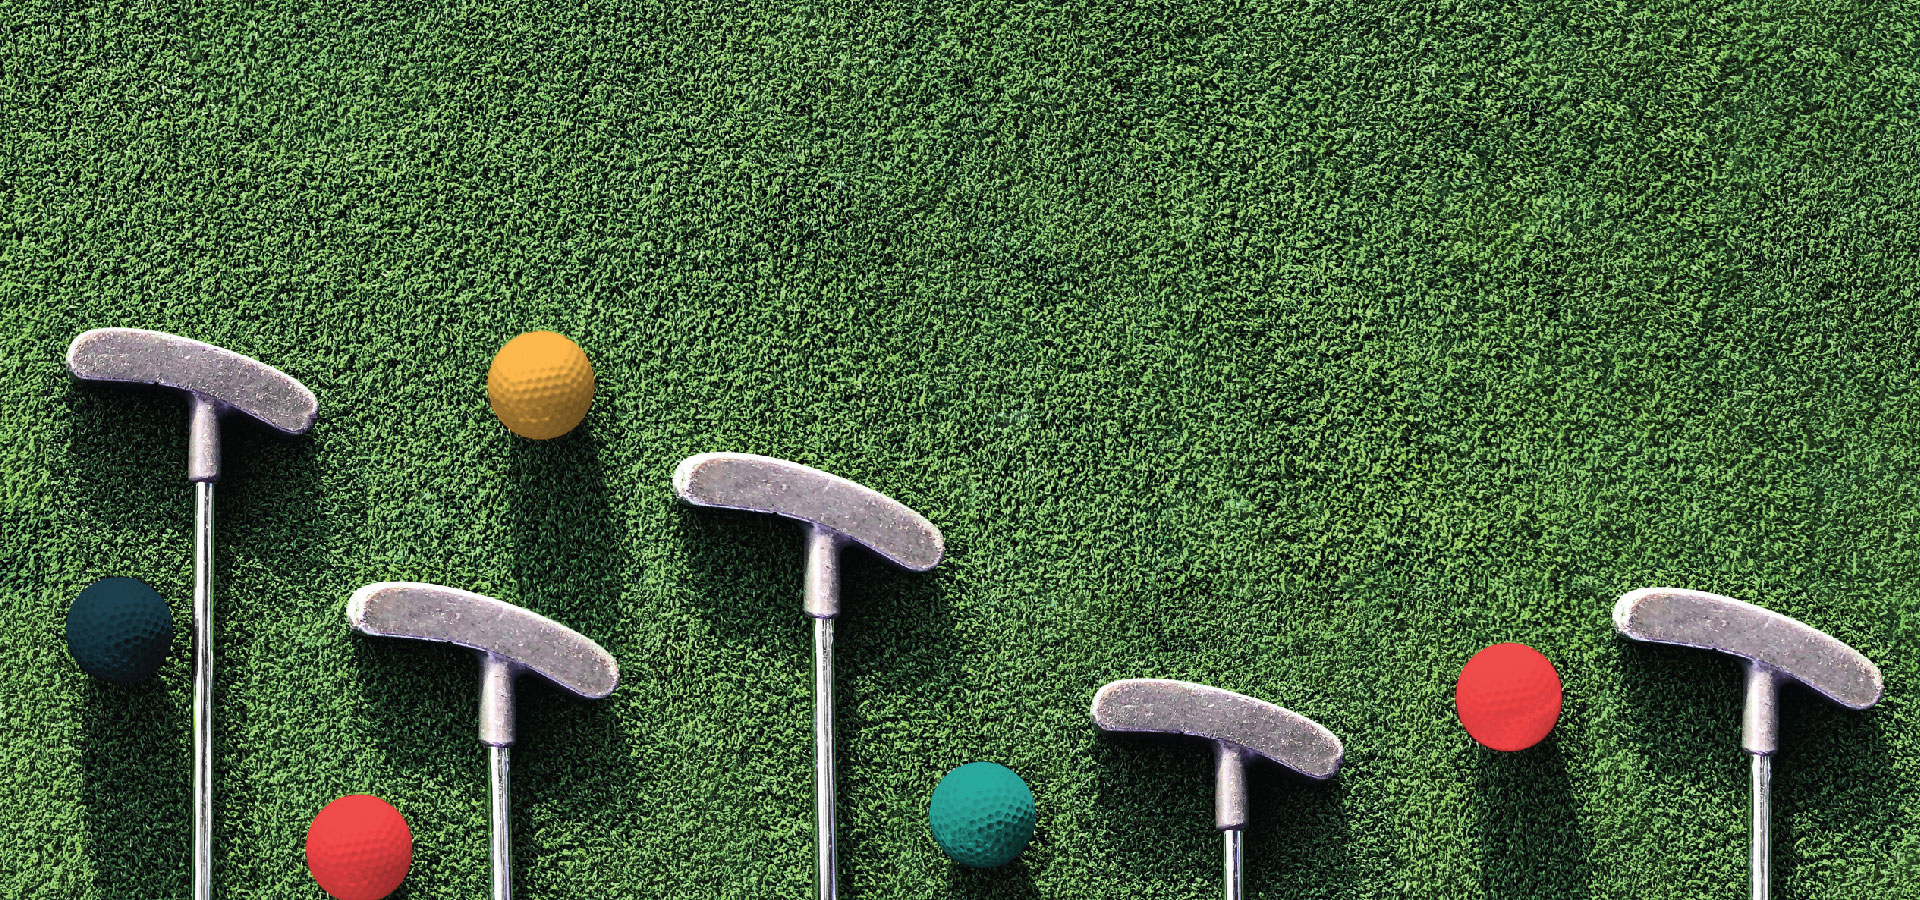 Photograph of mini golf clubs and turf with colored golf balls